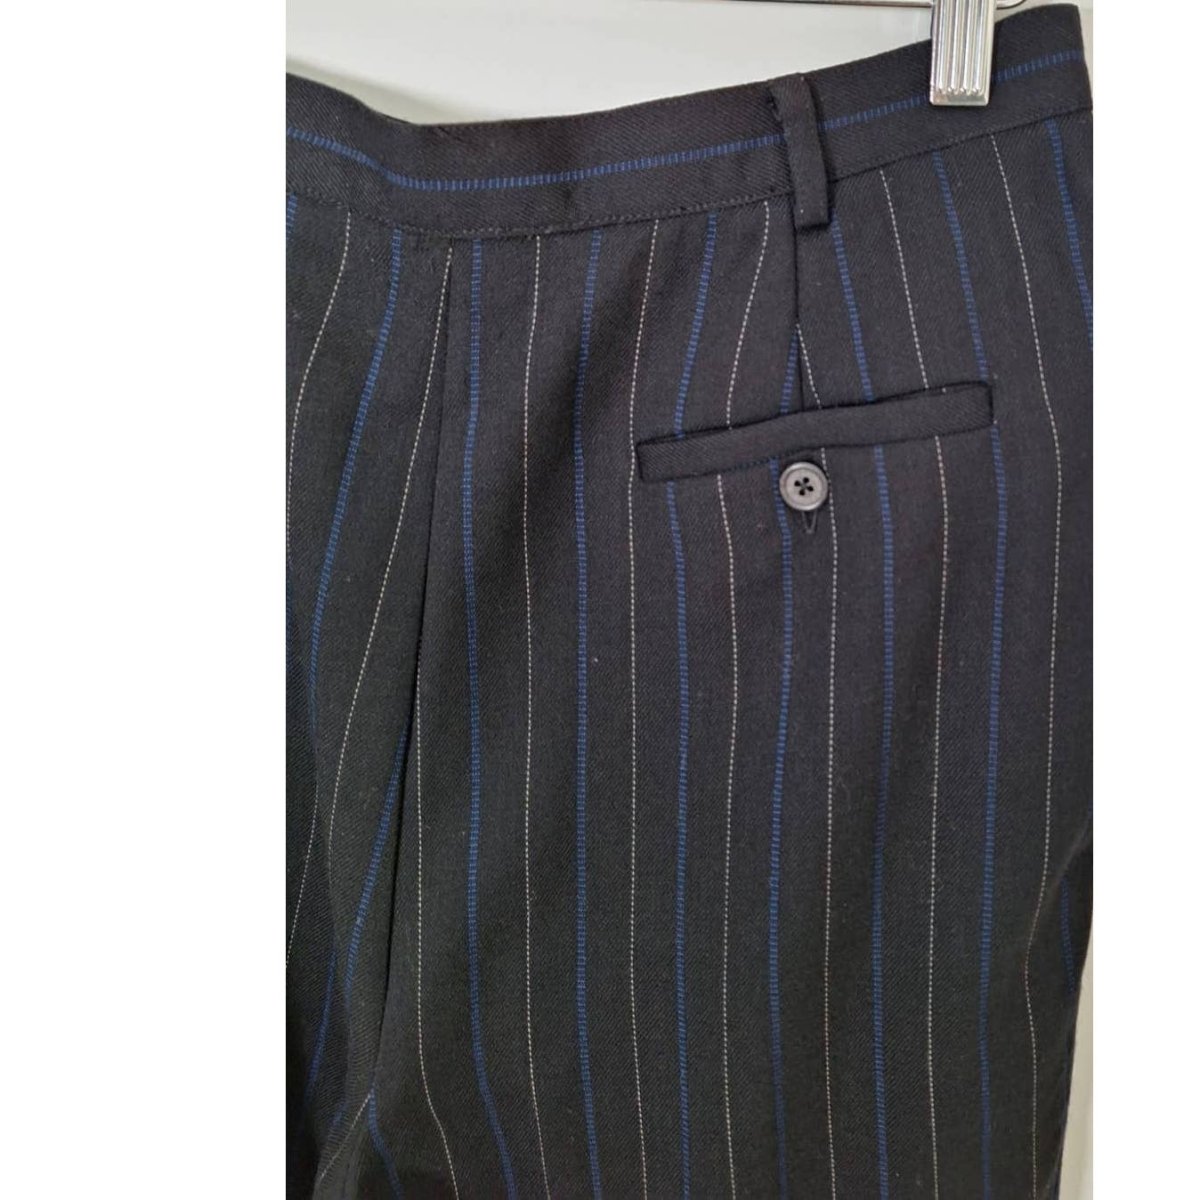 90s Black & Electric Blue Wool Pinstripe Pants Size 8 Waist 30" - themallvintage The Mall Vintage